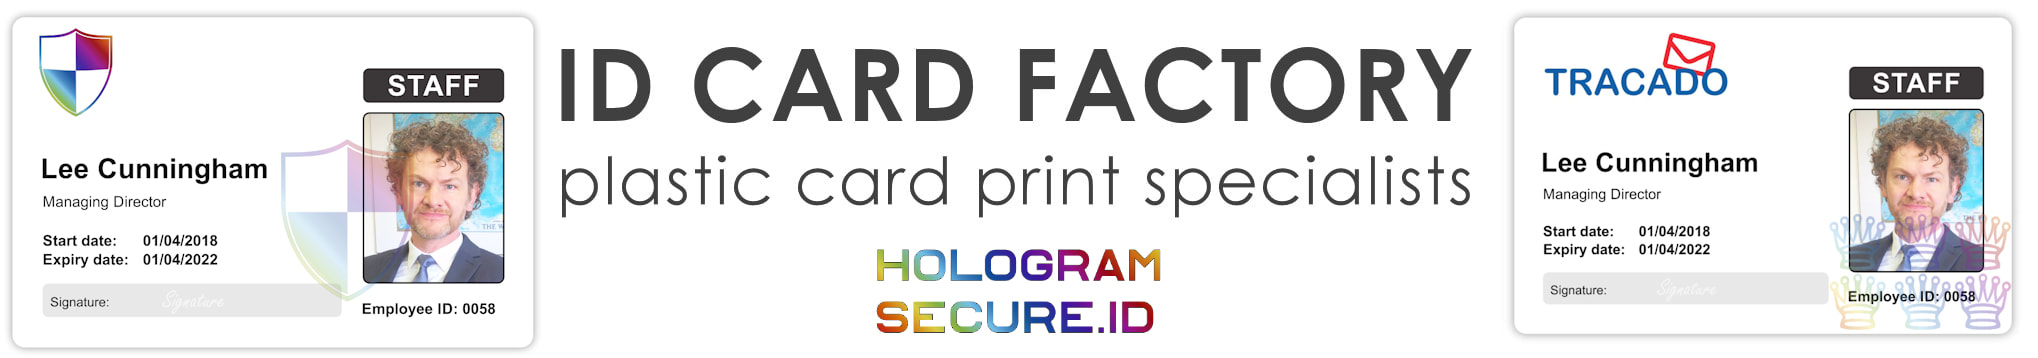 Stoke on trent holographic ID cards | examples of staff photo ID cards | samples of employee Identity card printing | Workers ID cards printed with hologram